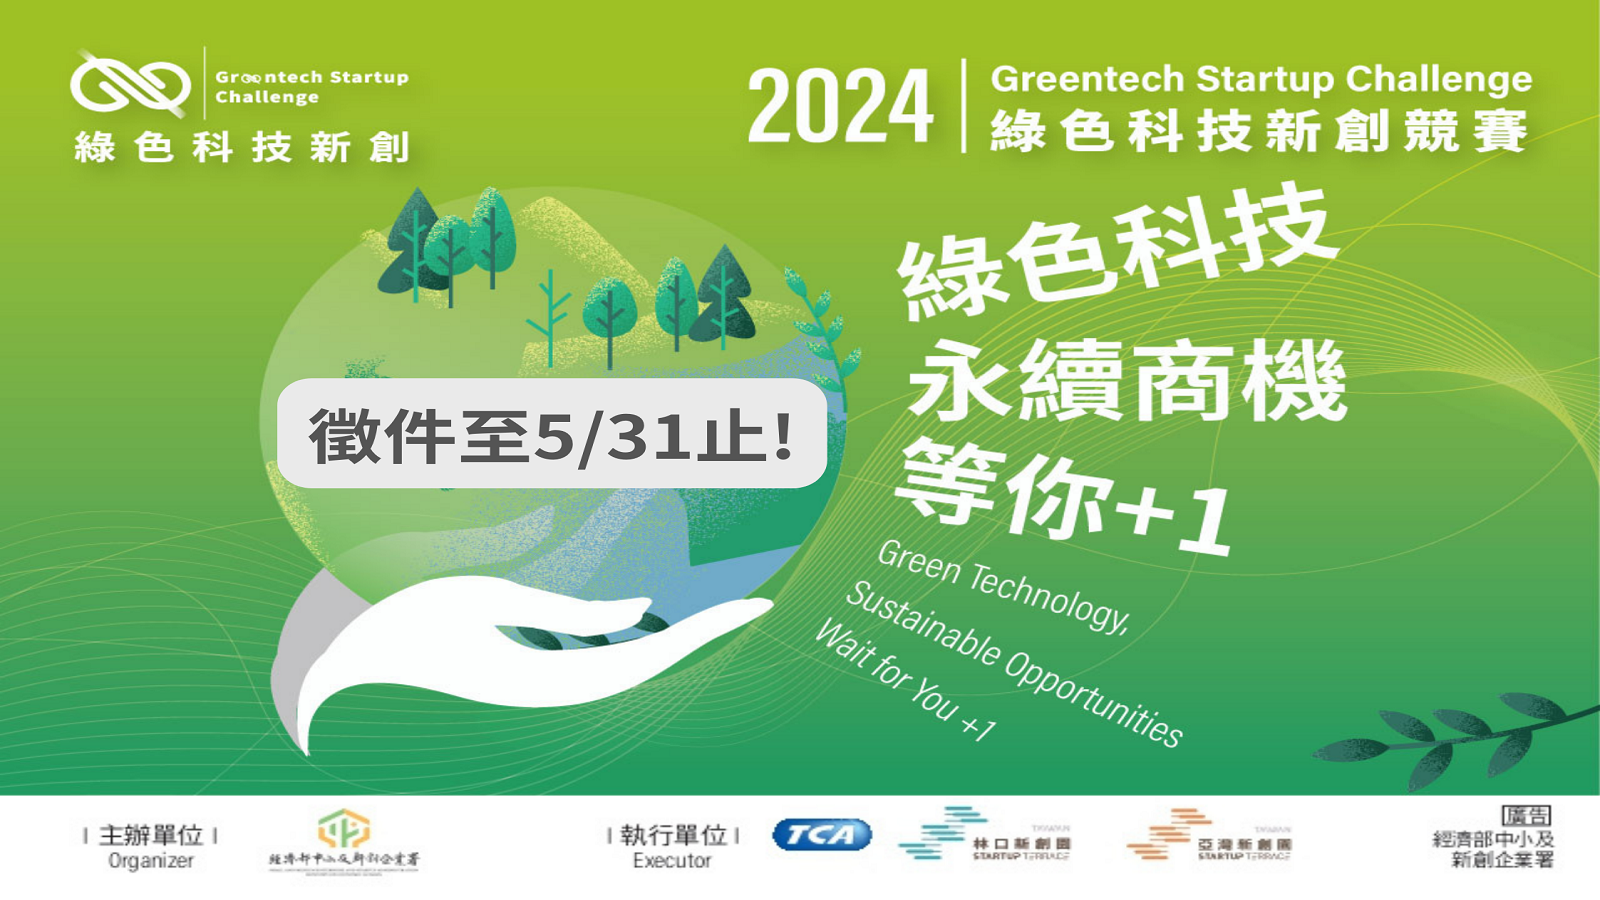 The 2024 Greentech Startup Challenge is now open for registration until May 31st